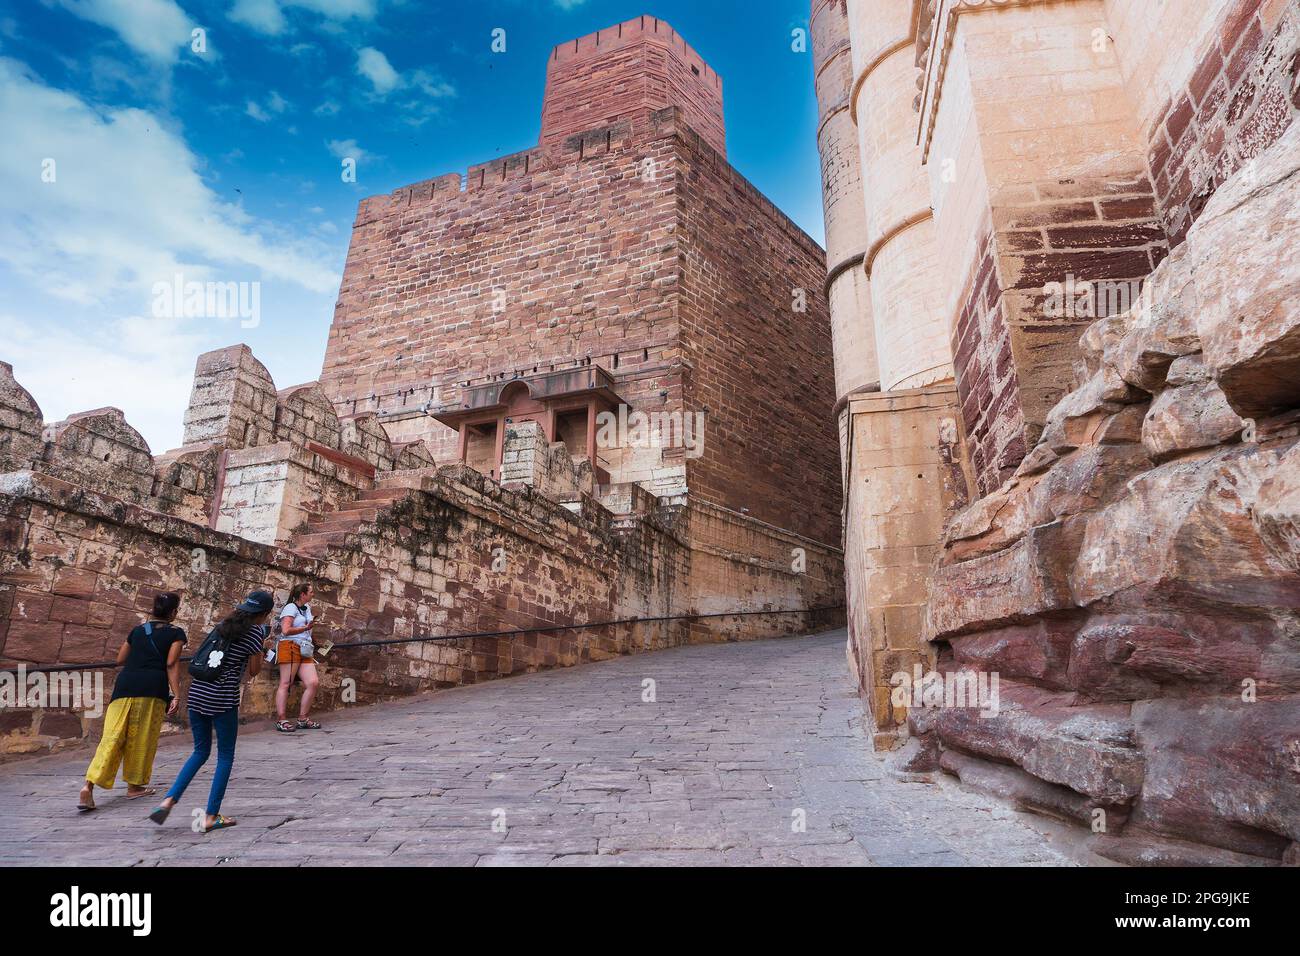 Jodhpur, Rajasthan, India - 19th October 2019 : Indian and foreigner women tourists climbing up famous Mehrangarh fort, UNESCO world heritage site. Stock Photo